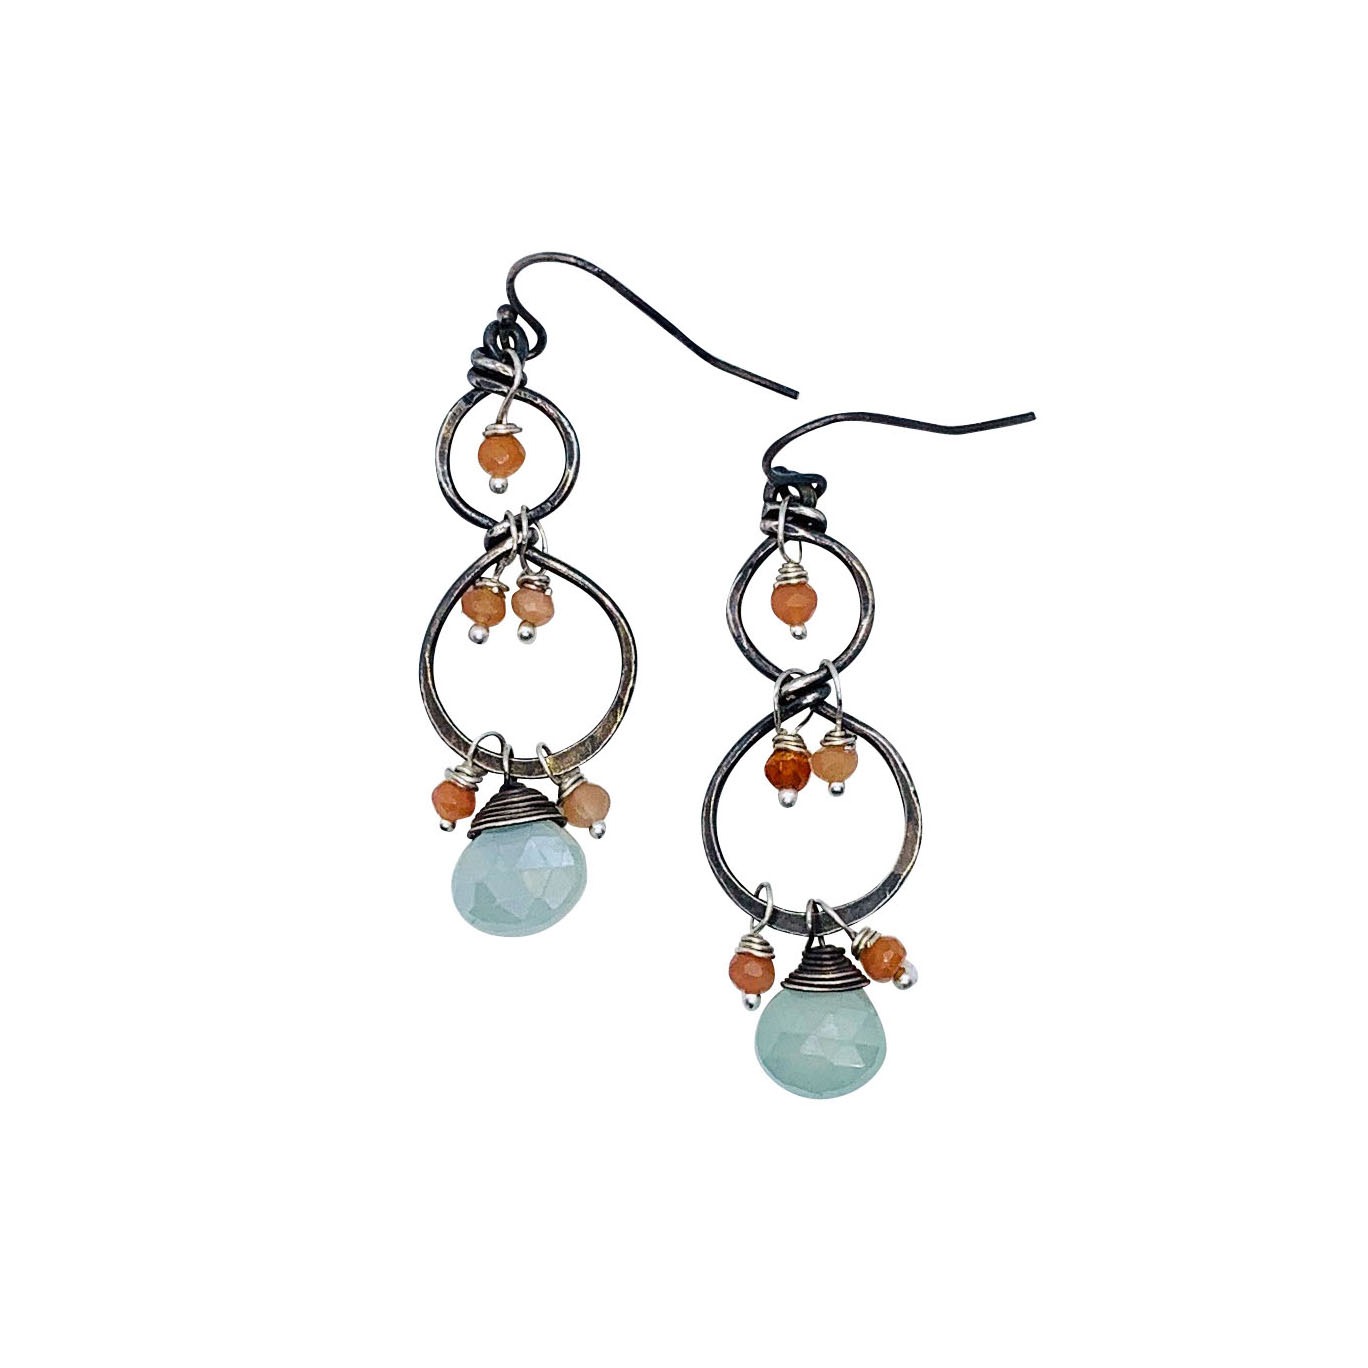 Buy Blue Chalcedony And Sterling Silver Earrings Online | Shari Both ...